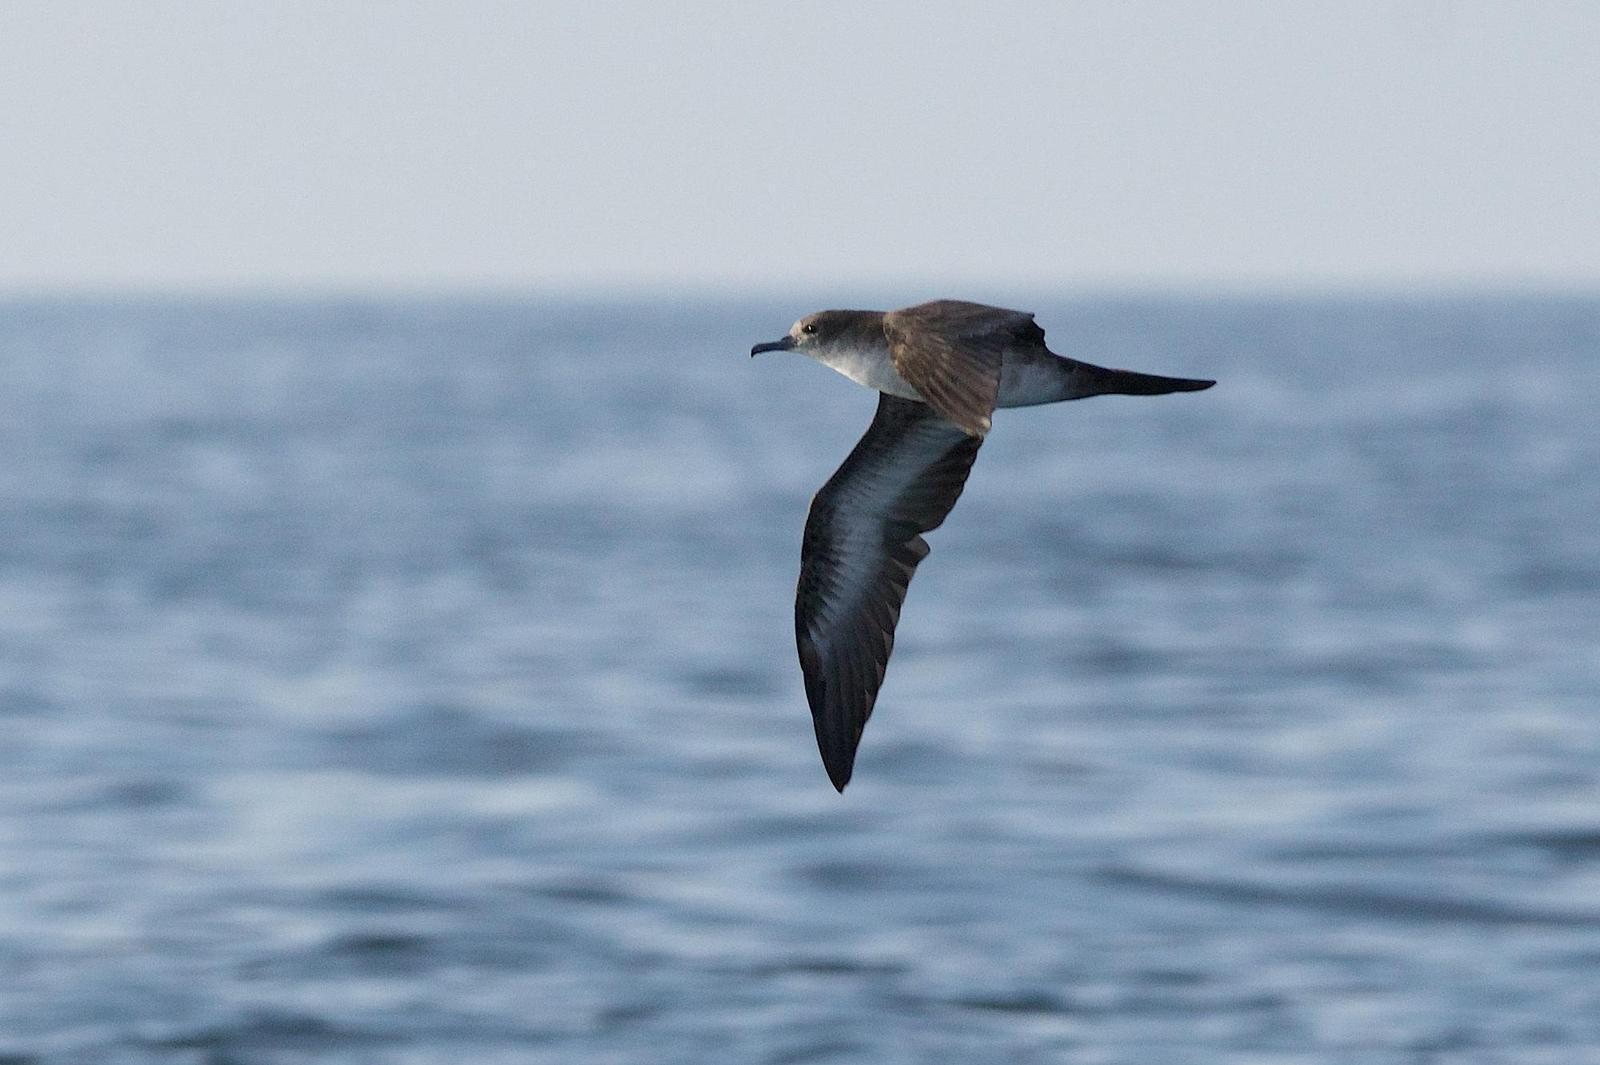 Wedge-tailed Shearwater Photo by Gerald Hoekstra